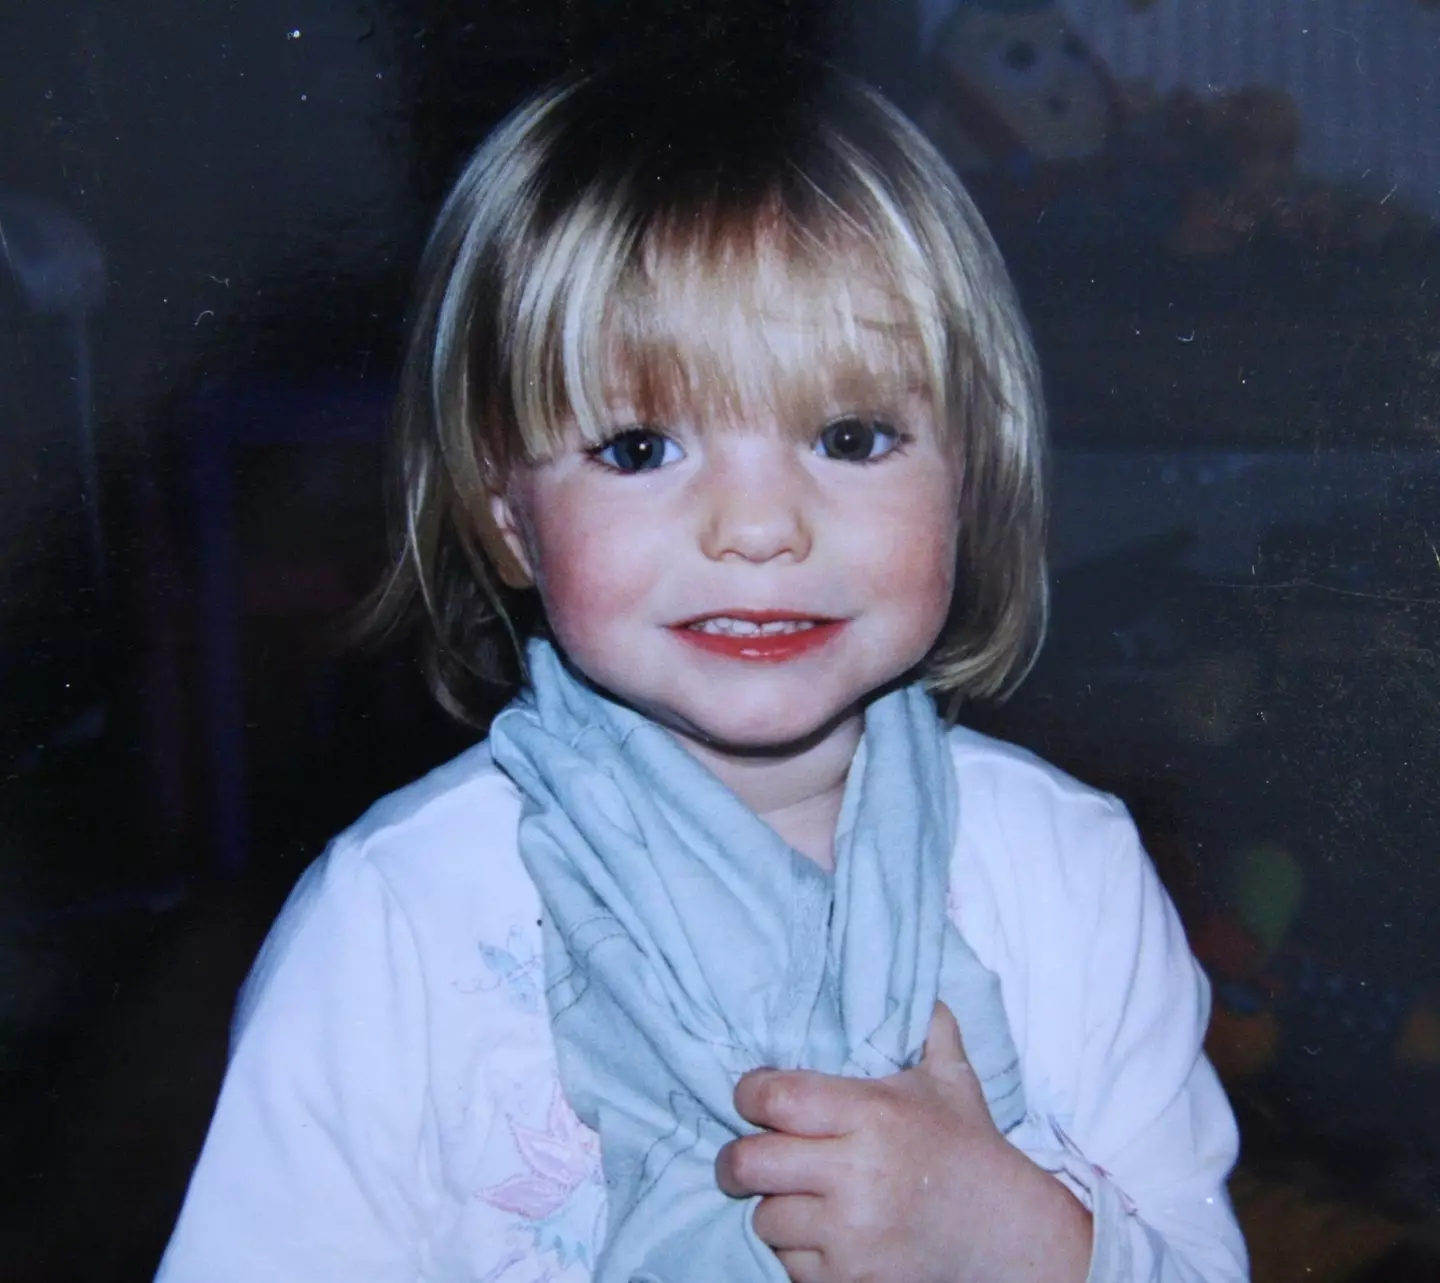 Julia Wandelt said she thought she was Madeleine McCann and wanted to know the truth.